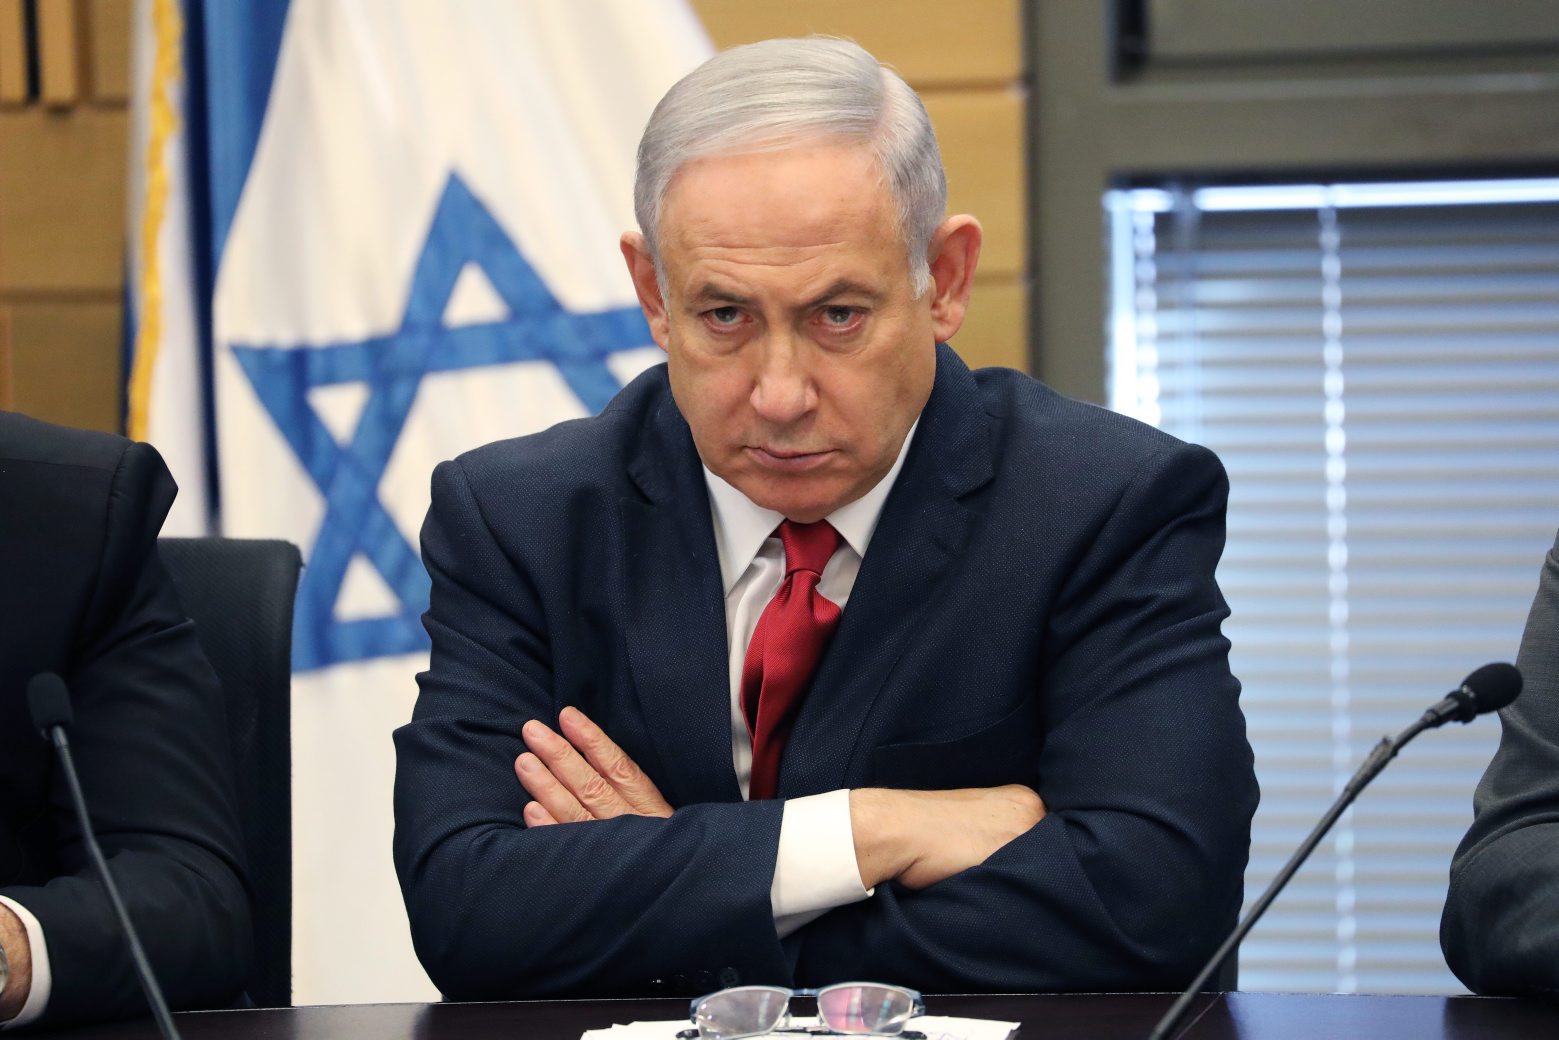 epa08014909 (FILE) - Israeli Prime Minister and leader of Likud Party Benjamin Netanyahu during an extended faction meeting of the right-wing bloc members at the Israeli Knesset (parliament) in Jerusalem, Israel, 18 November 2019 (reissued 21 November 2019). Reports on 21 November 2019 state Israeli Prime Minister Benjamin Netanyahu has officially been charged by the attorney general in a number of corruption scandals. Netanyahu was charged with bribery, breach of trust and fraud.  EPA/ABIR SULTAN (FILE) ISRAEL GOVERNMENT NETANYAHU INDICTED